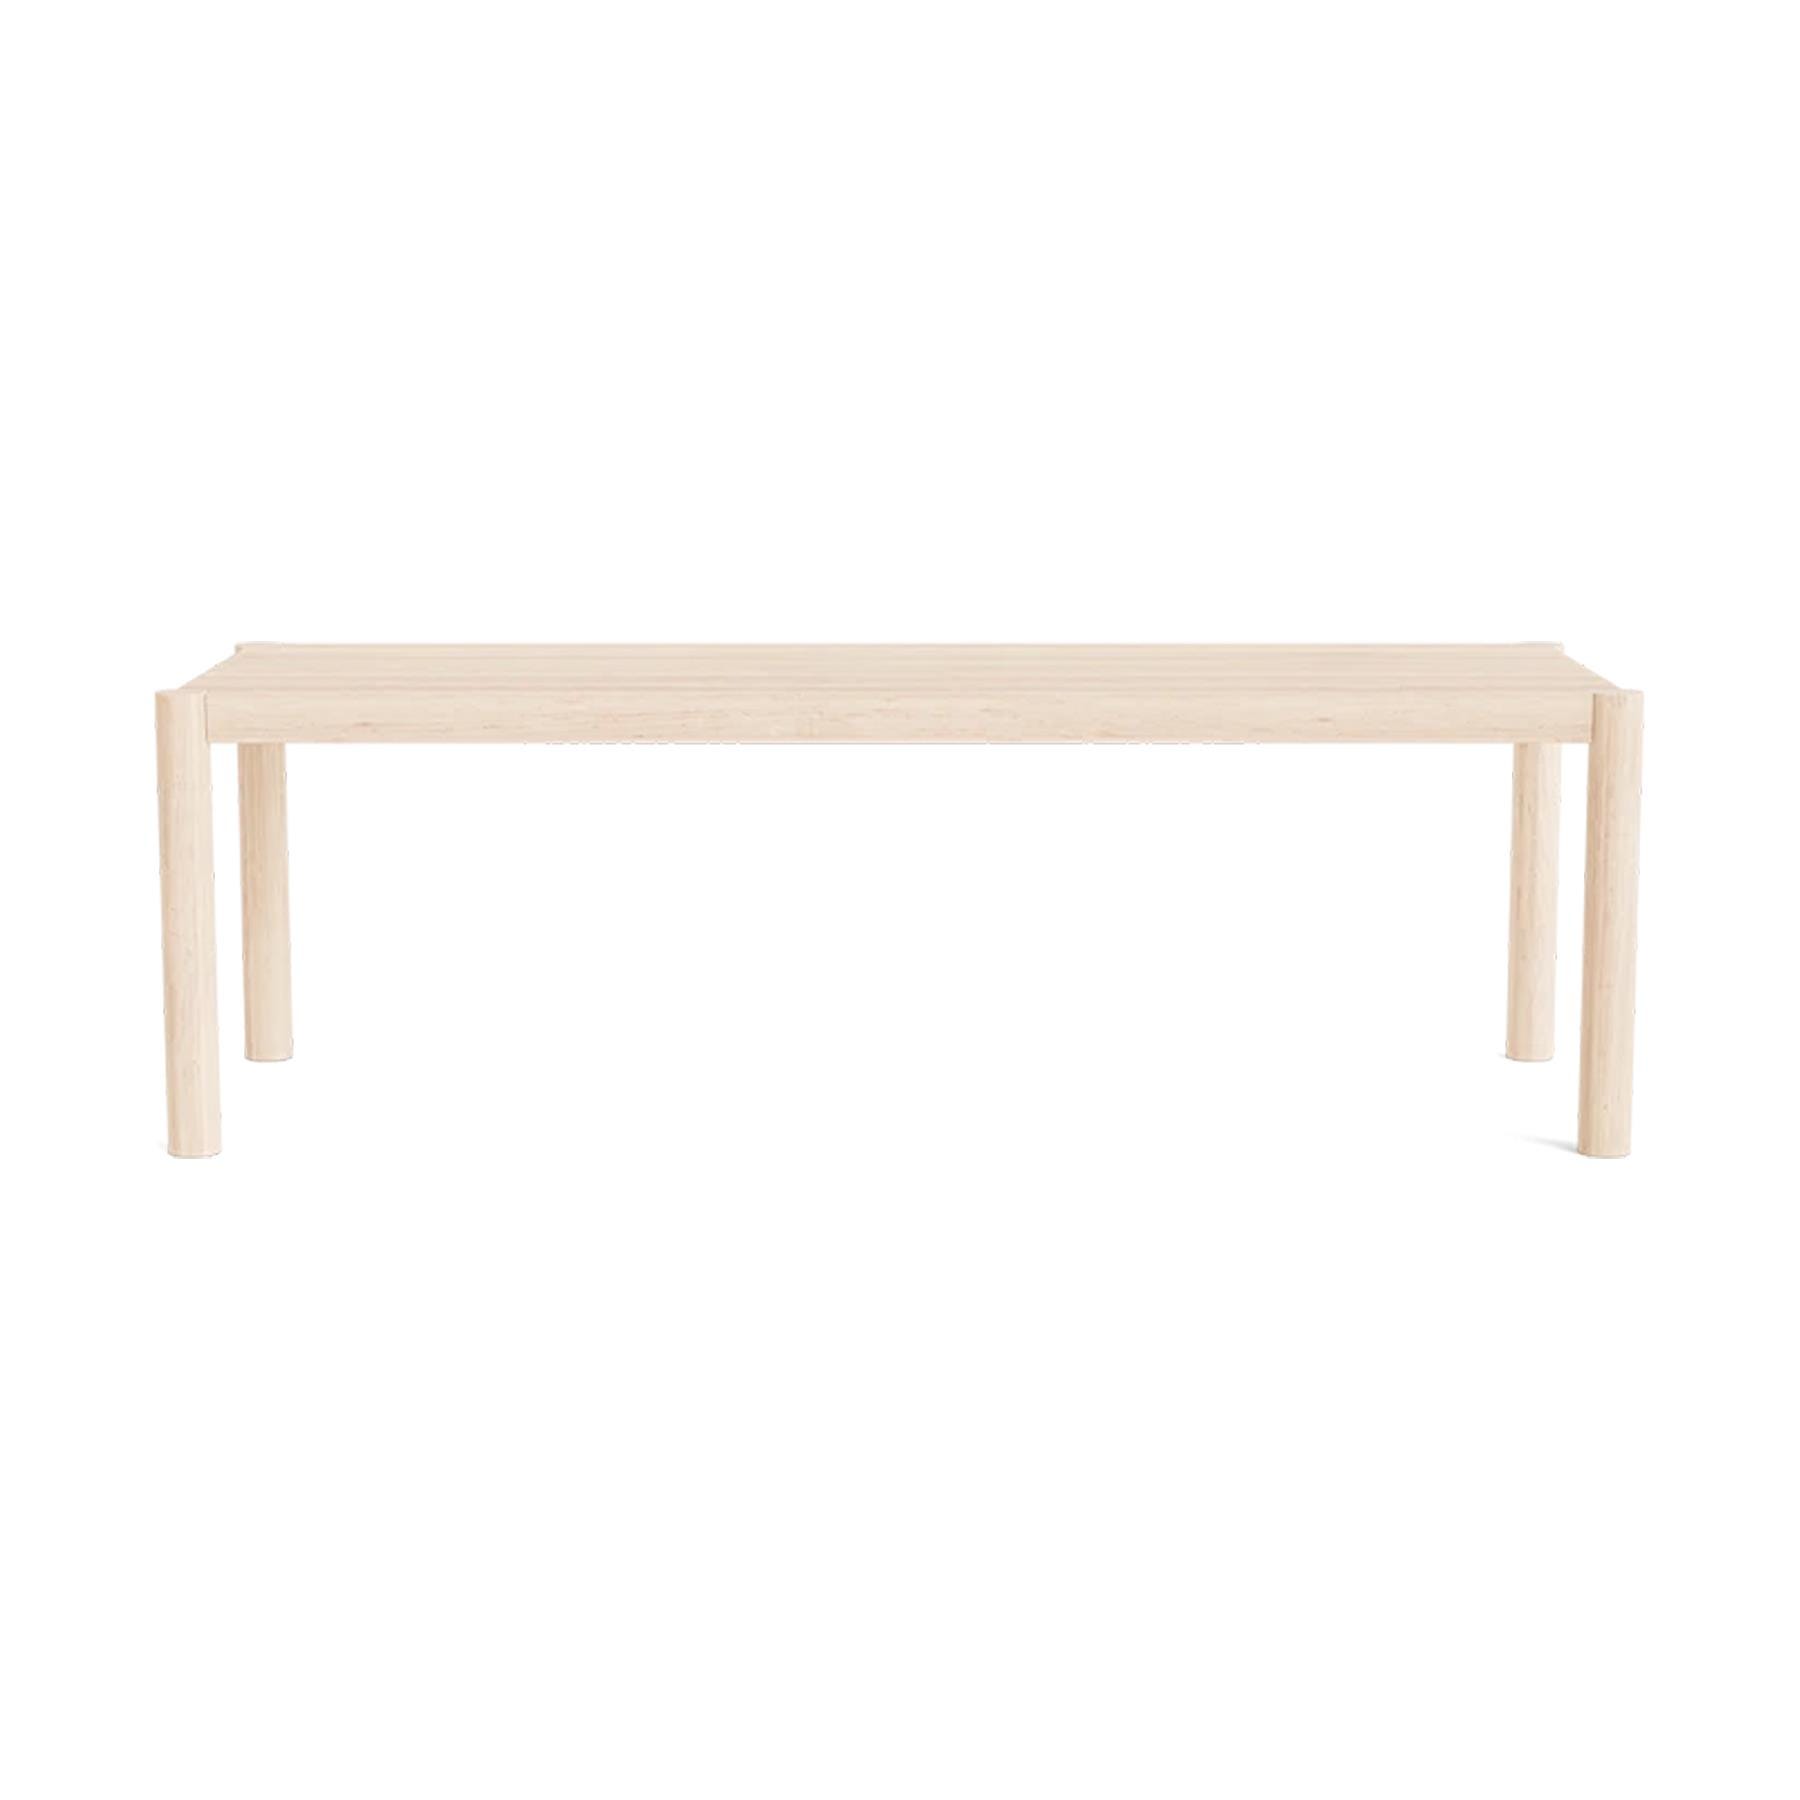 Make Nordic Tammi Coffee Table Rectangle Height 38cm Oak White Oil Light Wood Designer Furniture From Holloways Of Ludlow